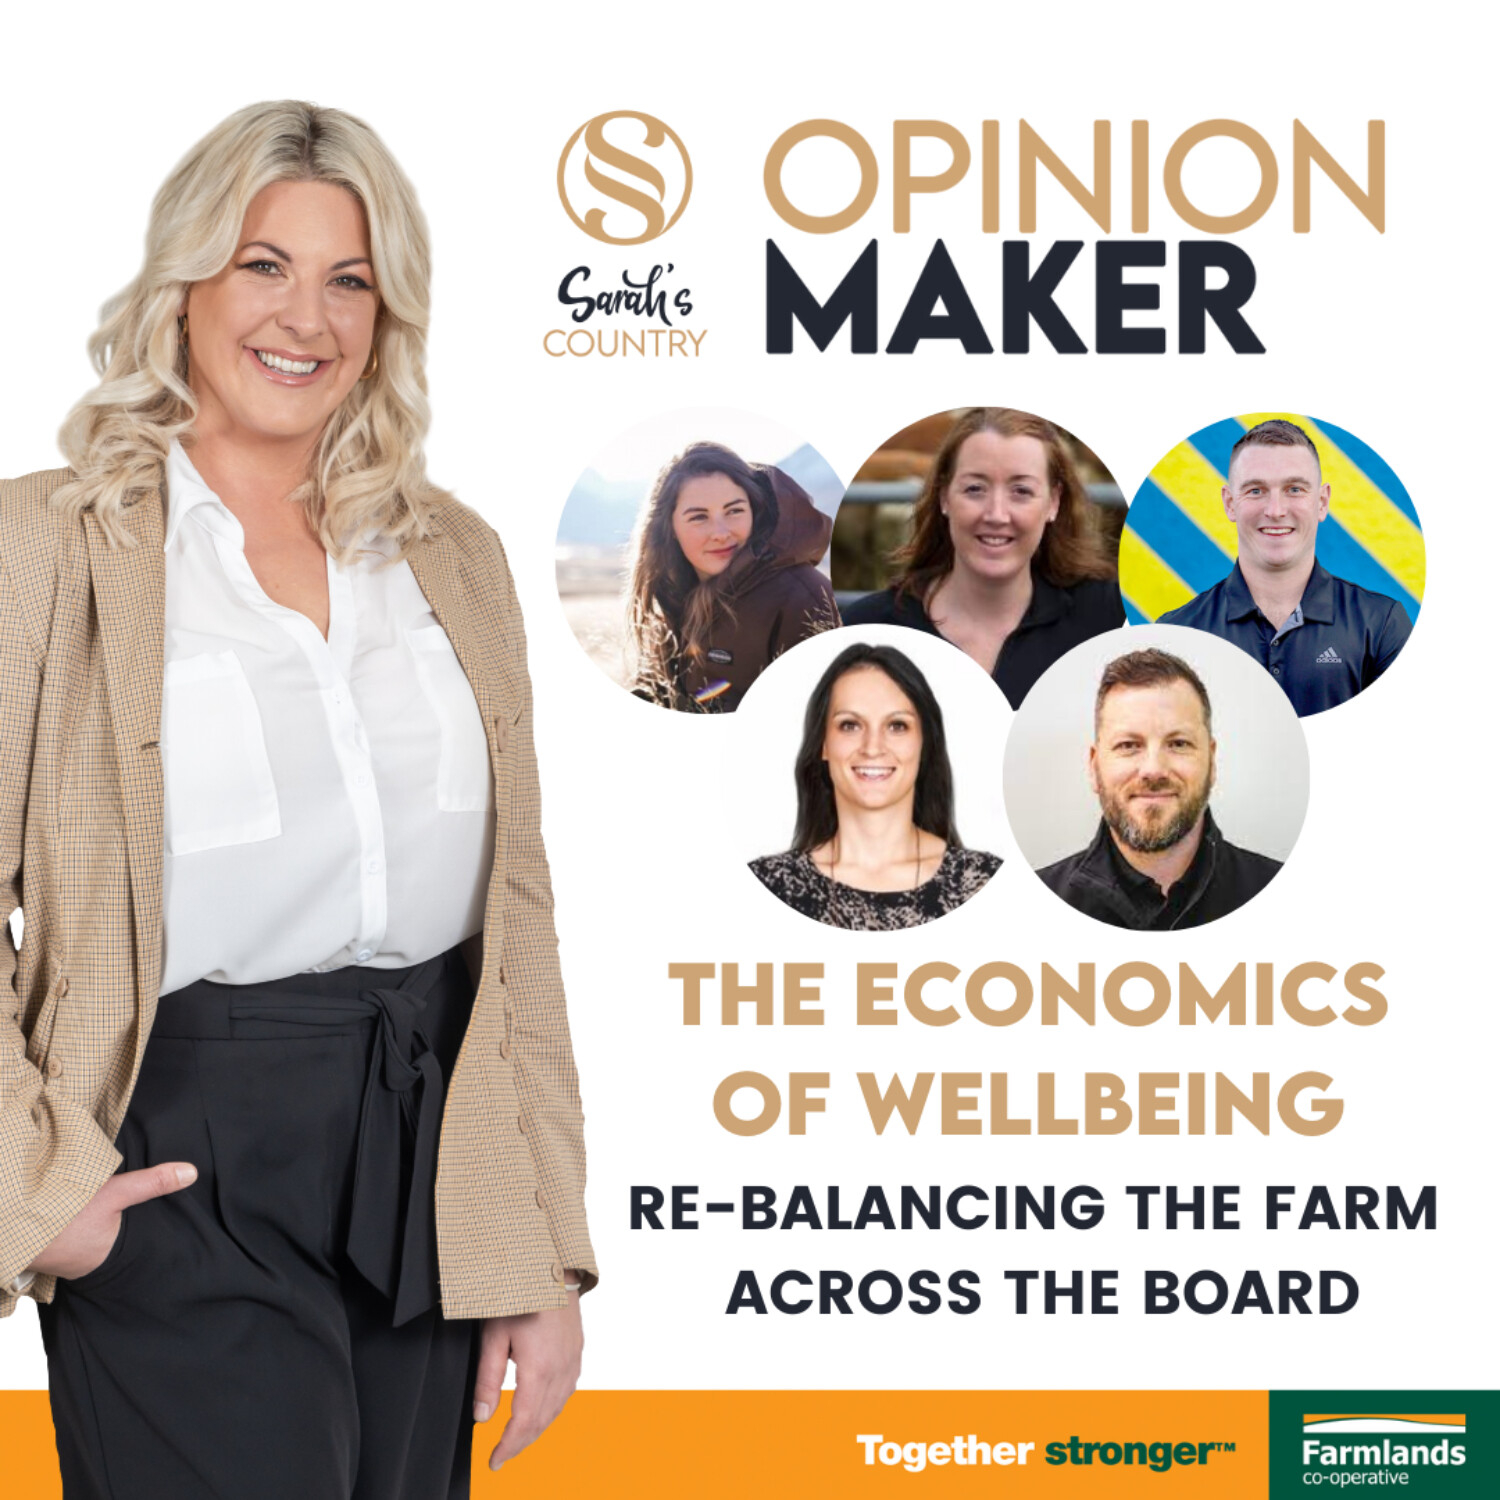 The Economics of Wellbeing - Re-balancing the farm across the board